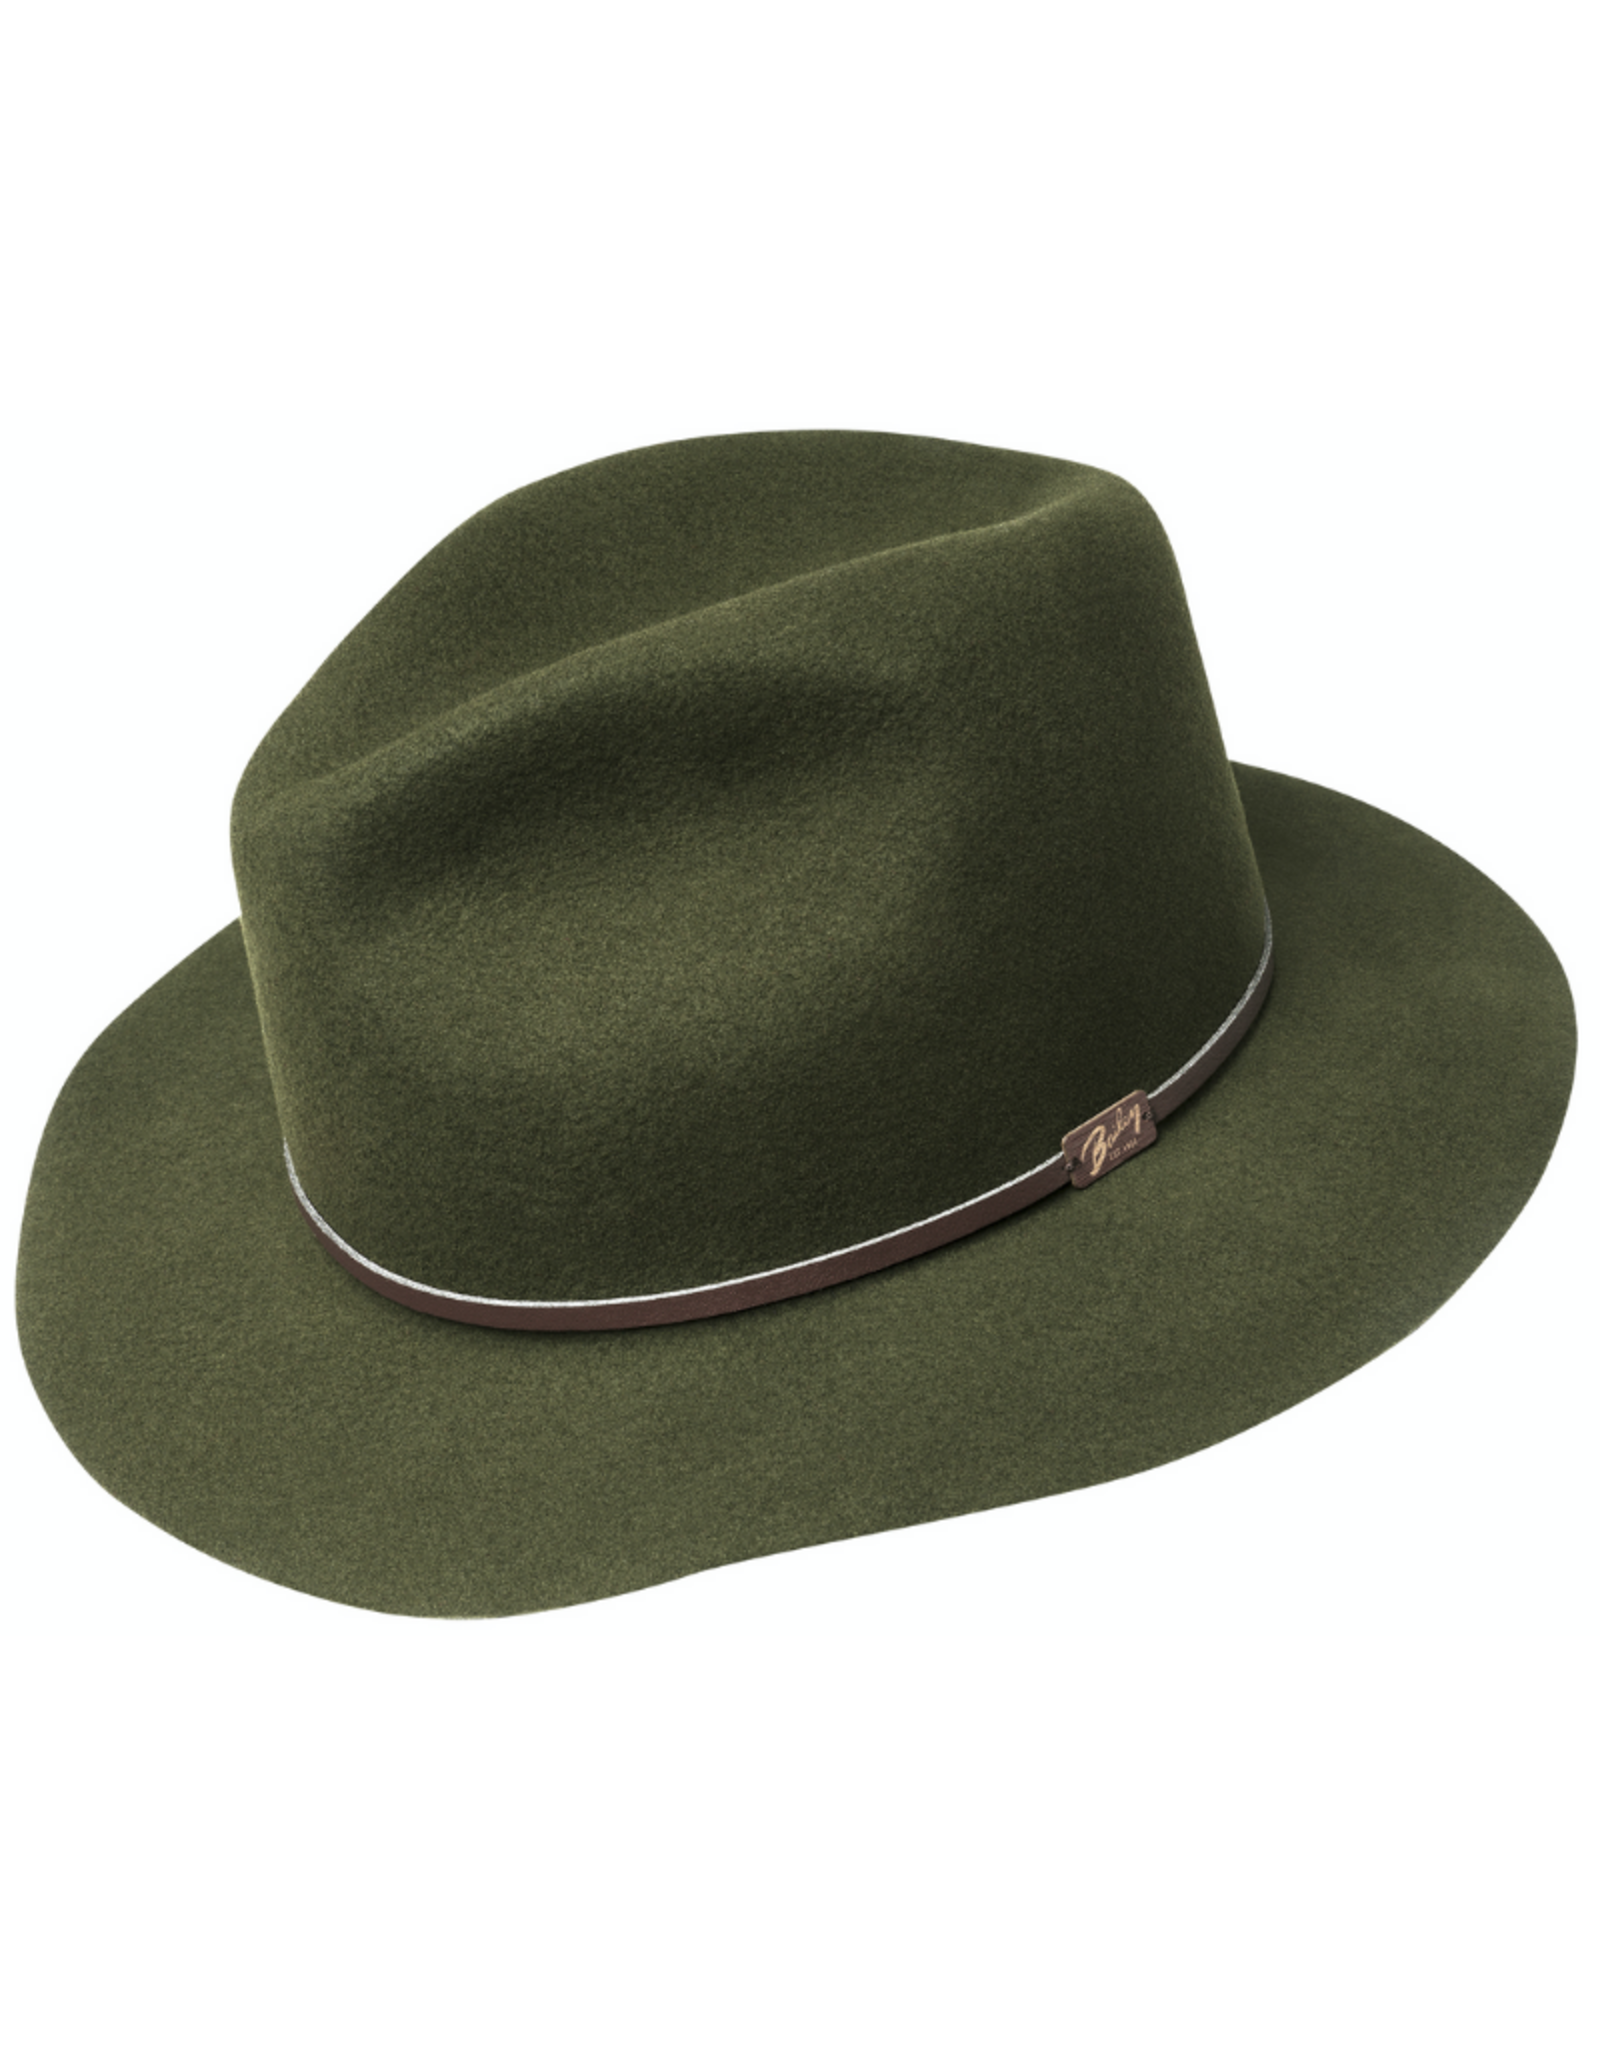 Bailey Hat Co. HAT-FEDORA "JACKMAN"ROLL UP